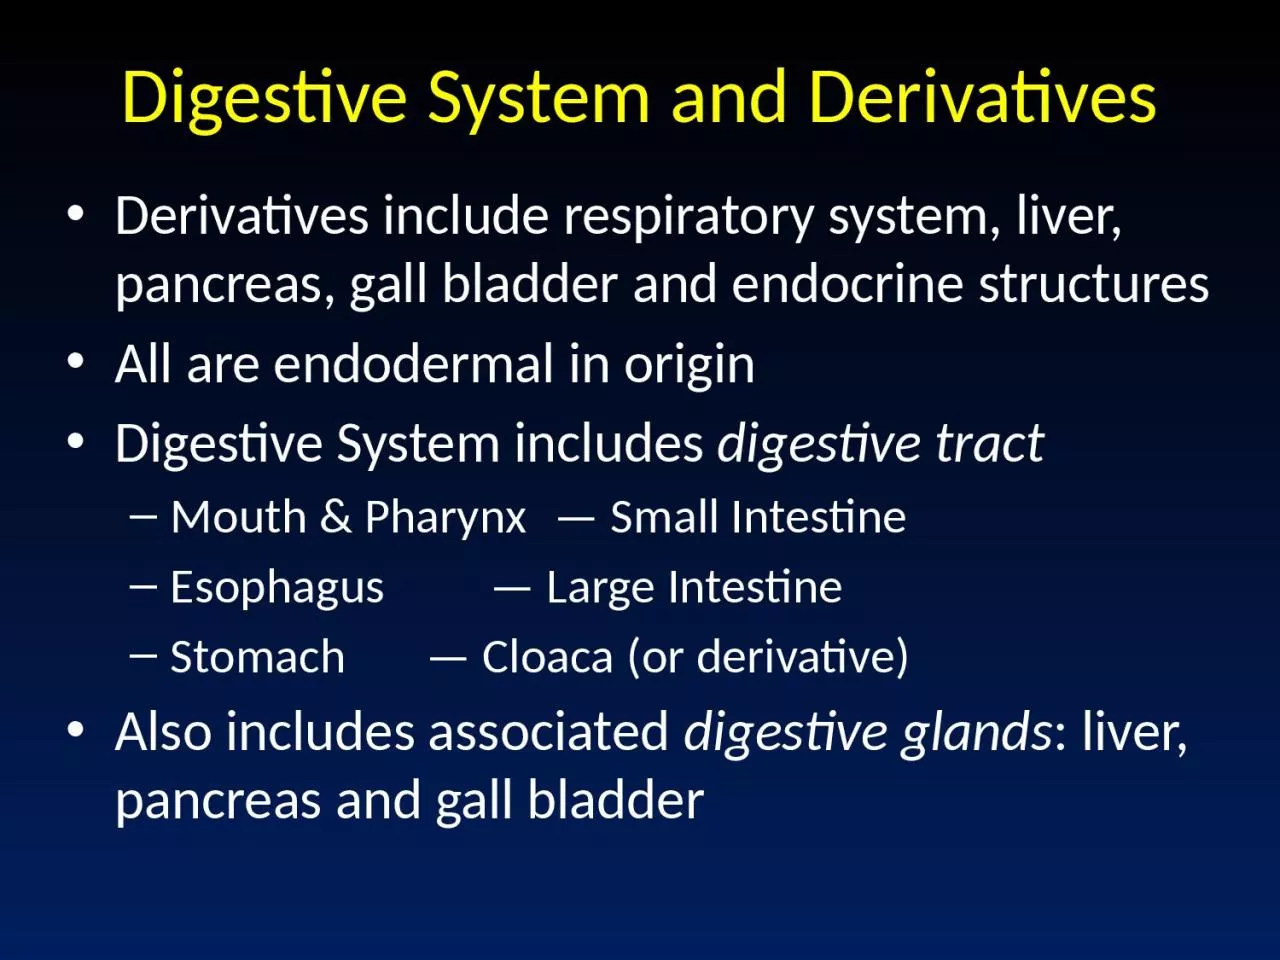 Digestive System and Derivatives